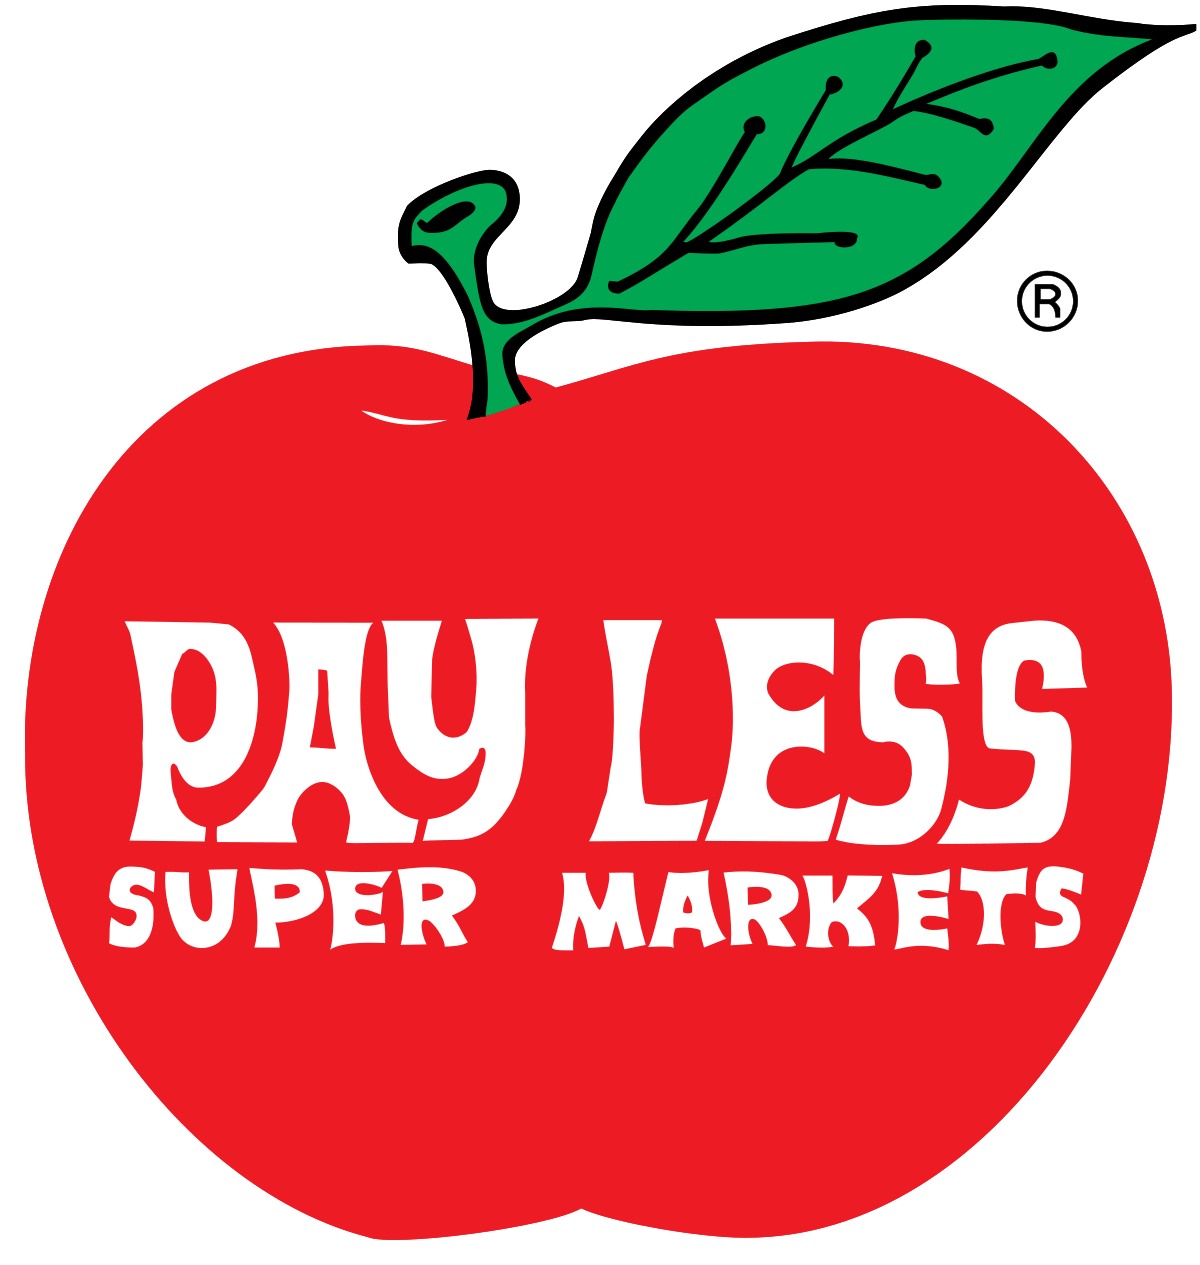 Food for Less Logo - Pay Less Super Markets